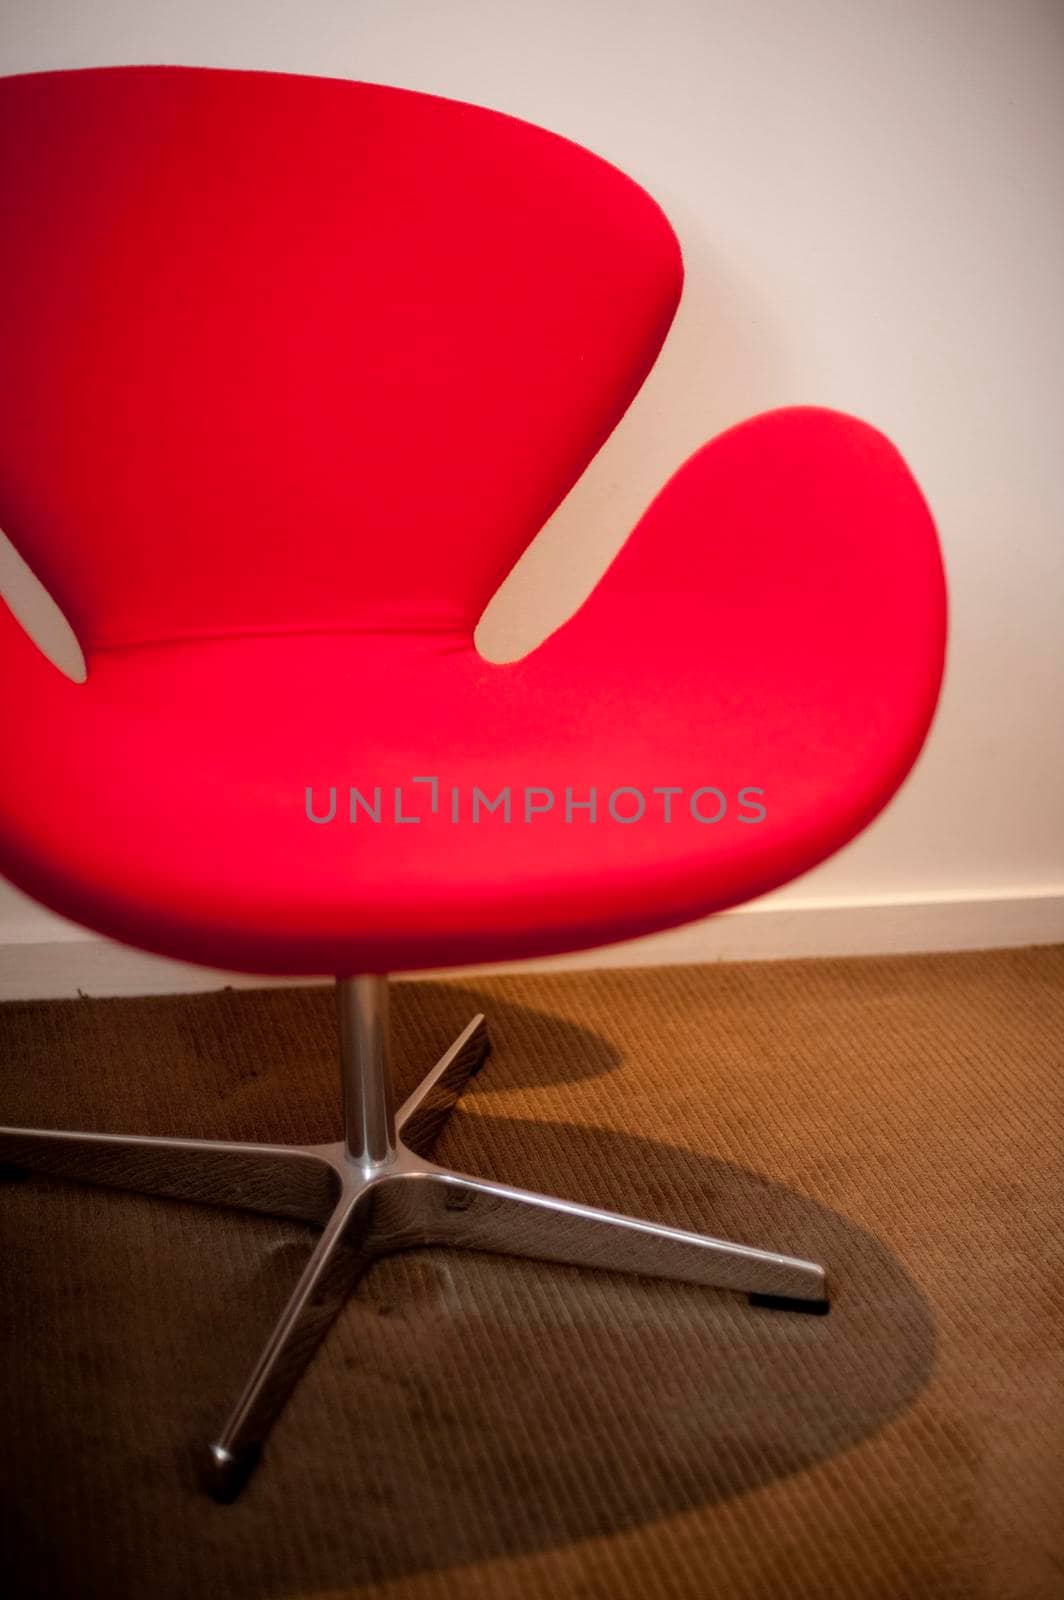 Close up of a modern red arm chair with a modular design and steel base on a brown carpet